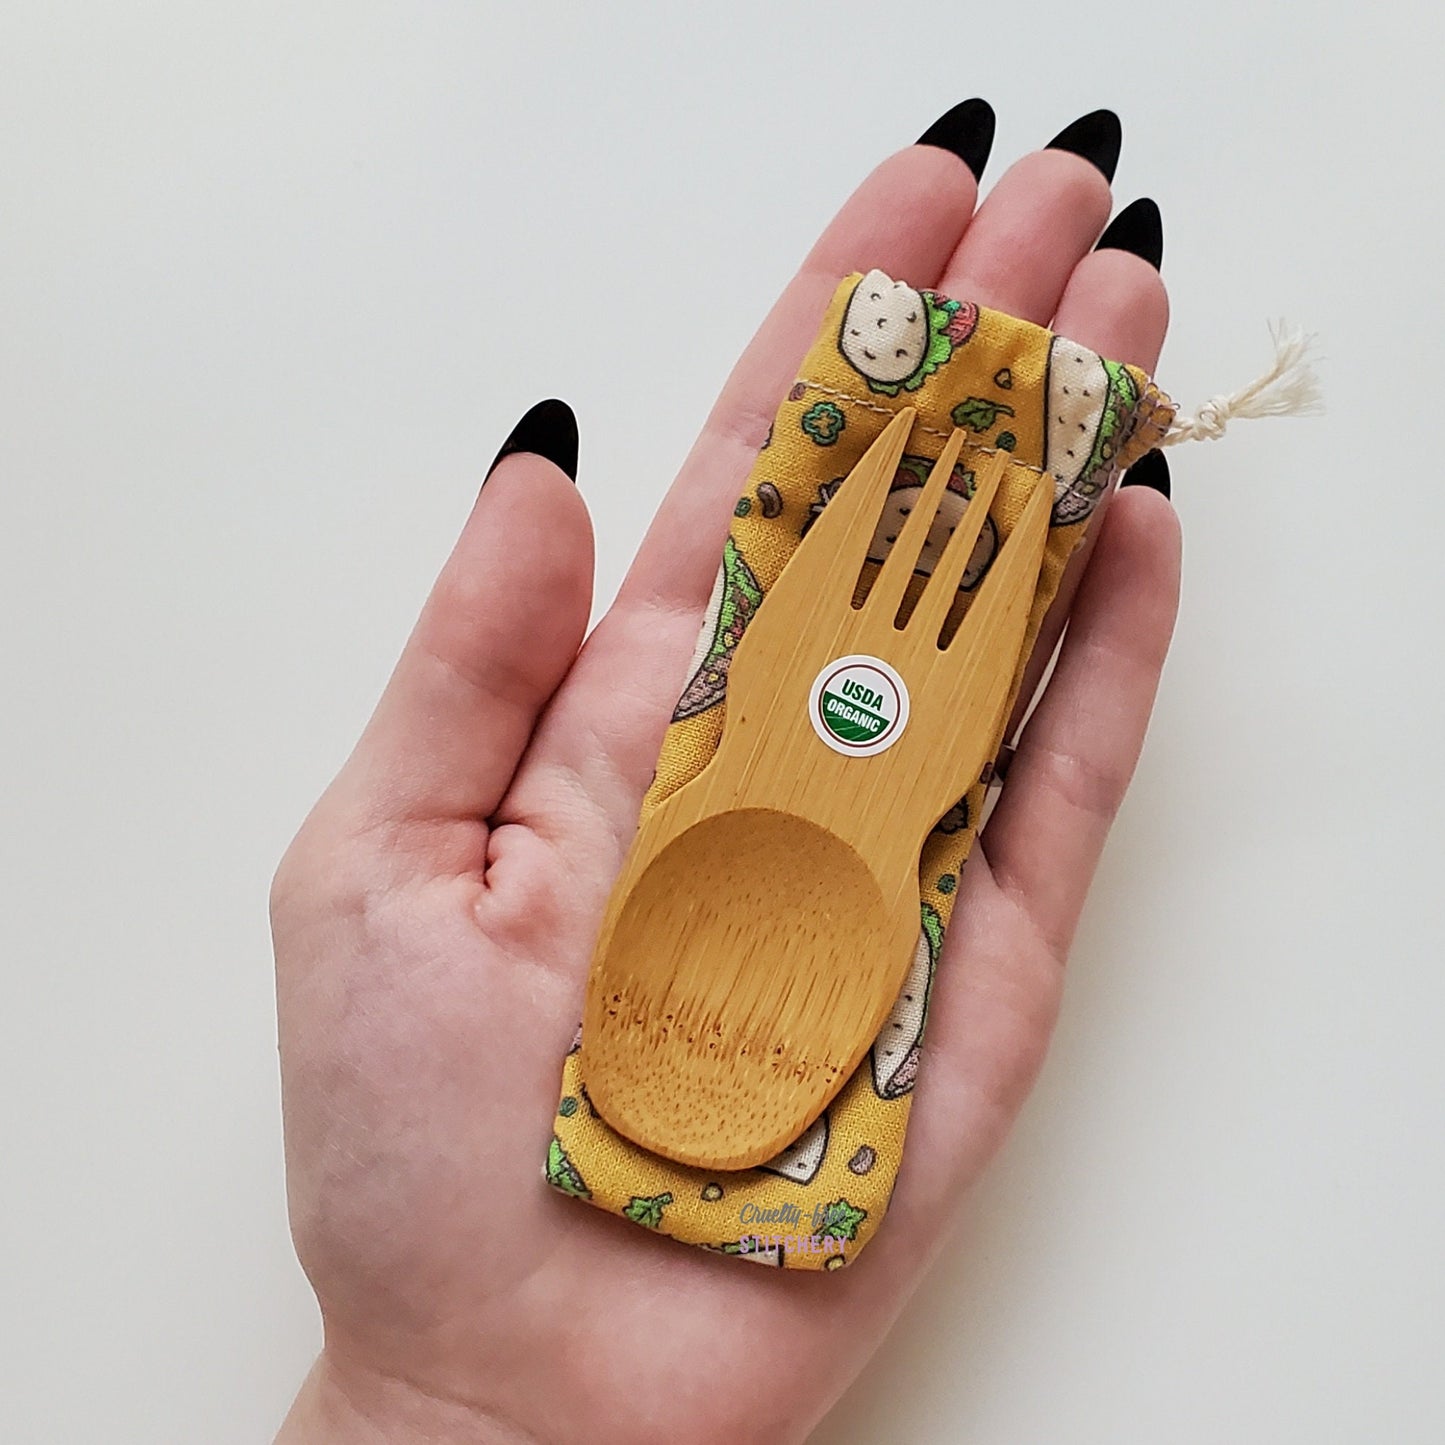 Reusable bamboo spork with pouch. Taco print fabric pouch with bamboo spork on top, laid on a hand for size reference. The spork is slightly longer than the fingers.